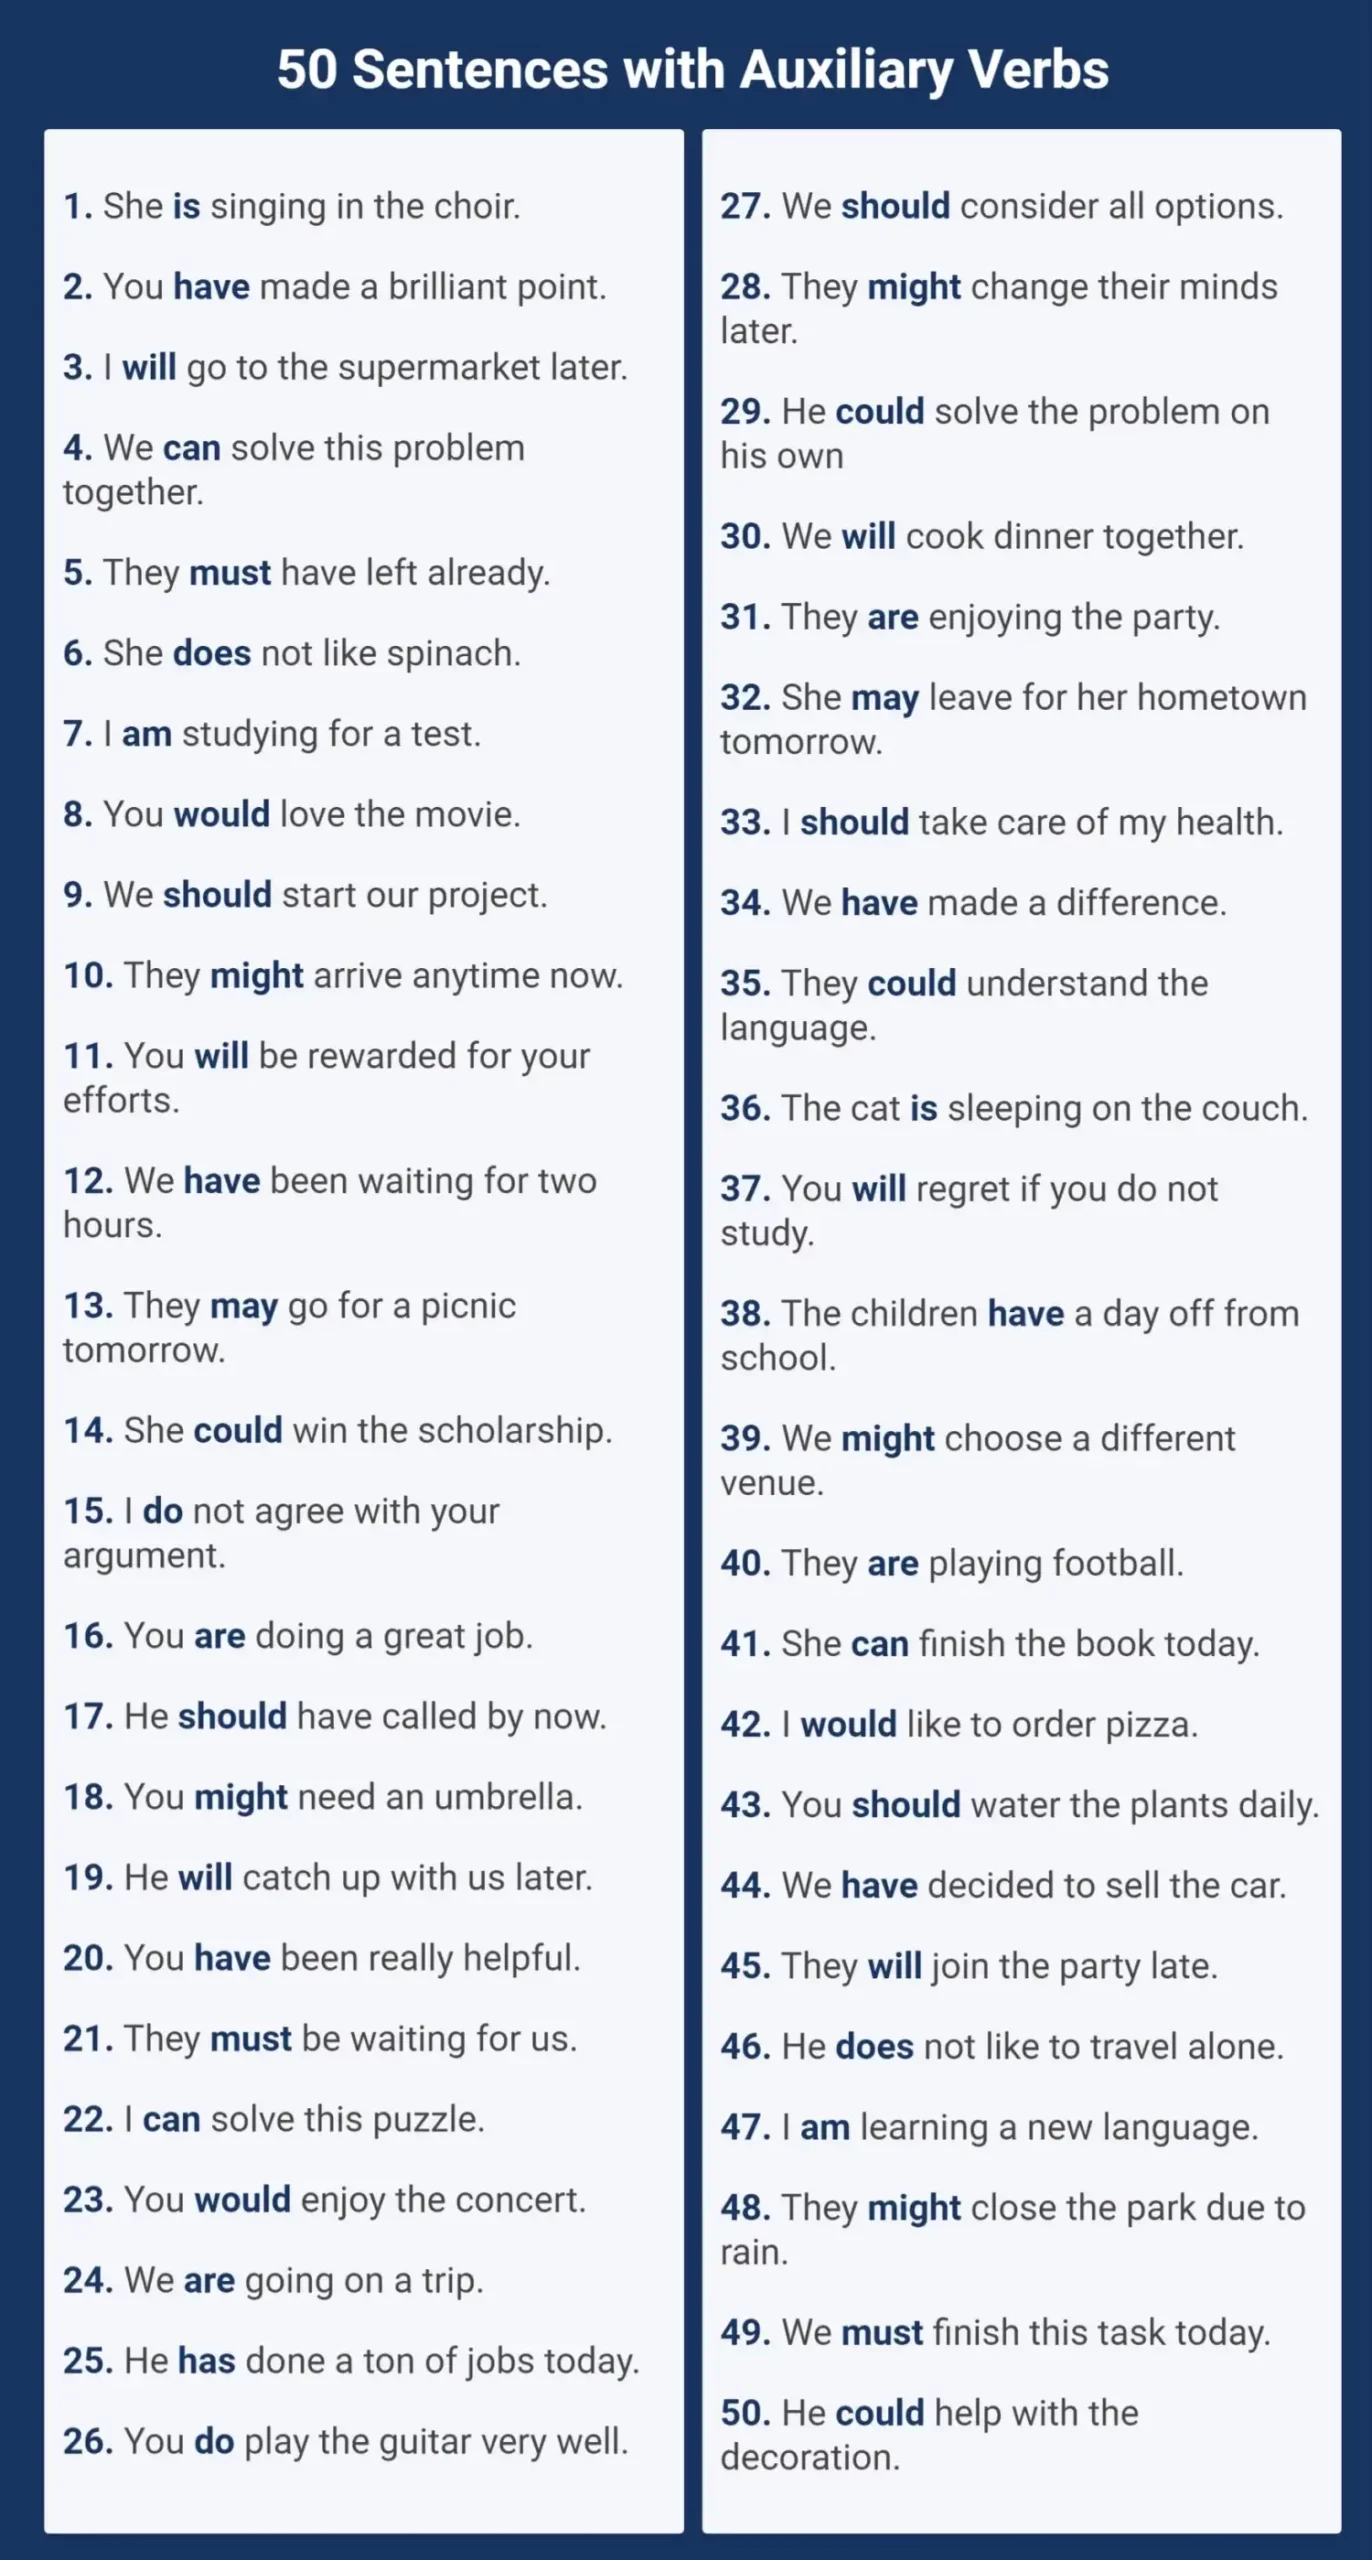 50 Sentences with auxiliary verbs full